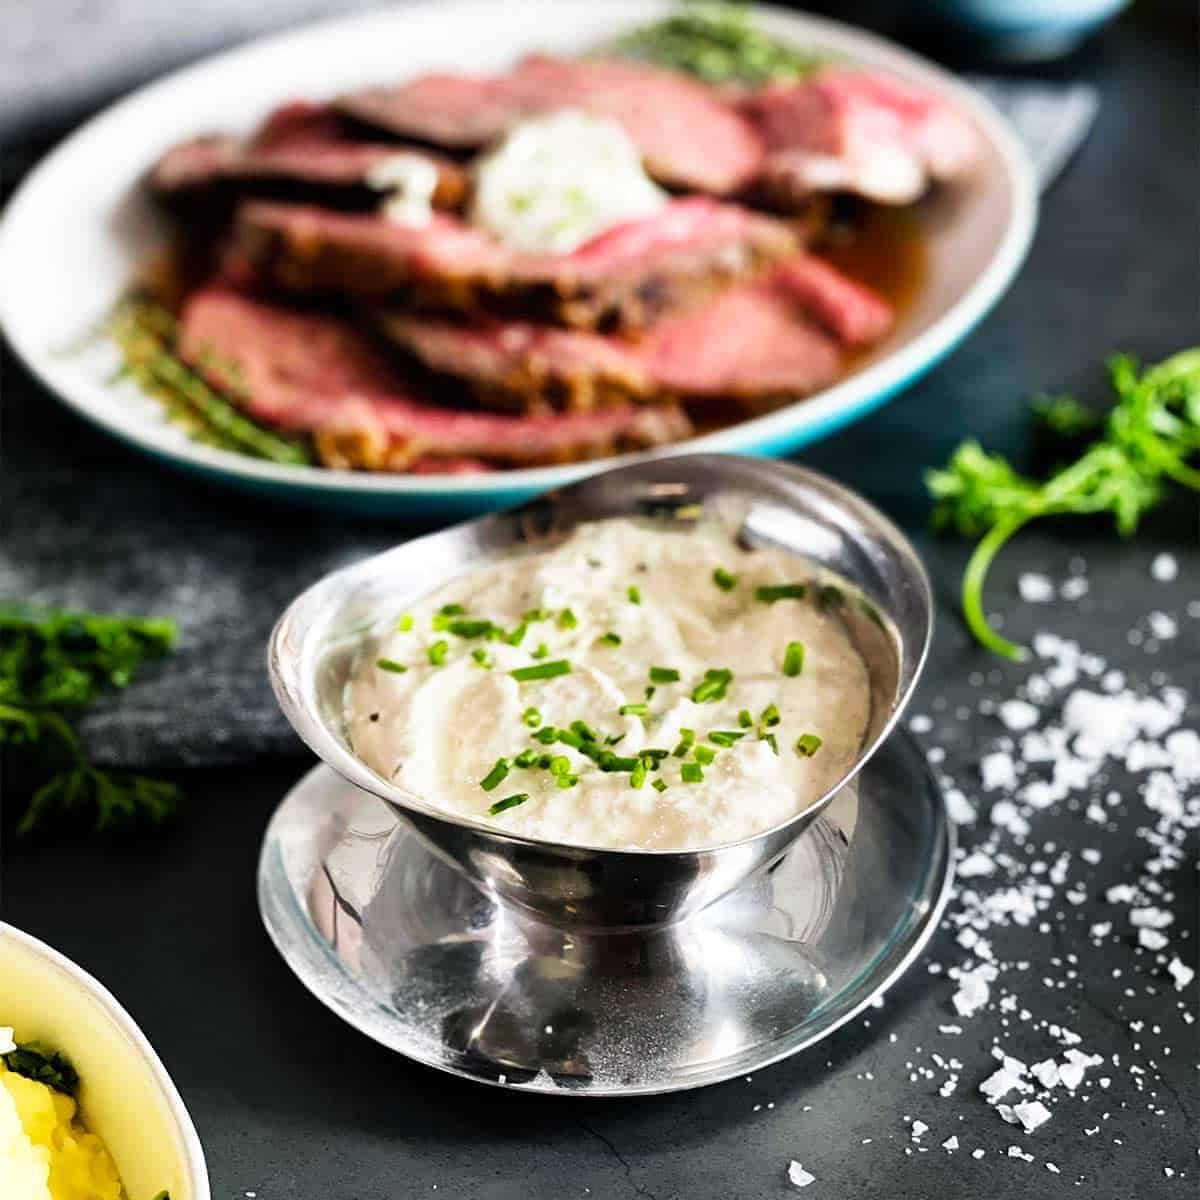 horseradish sauce in a silver bowl next to a platter of sliced prime rib